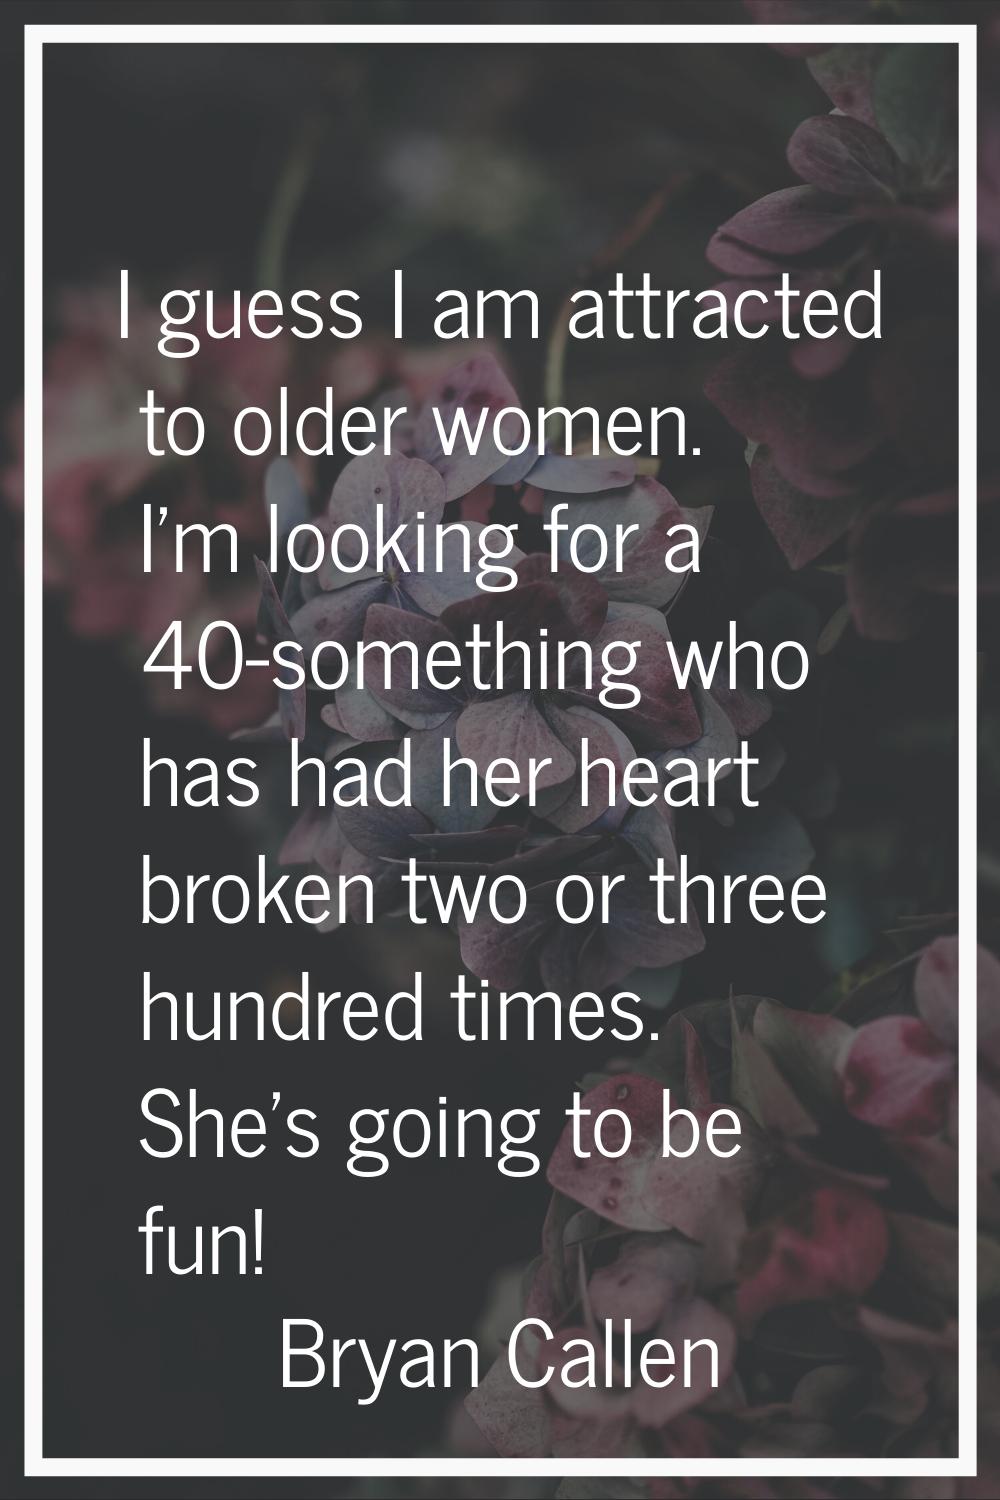 I guess I am attracted to older women. I'm looking for a 40-something who has had her heart broken 